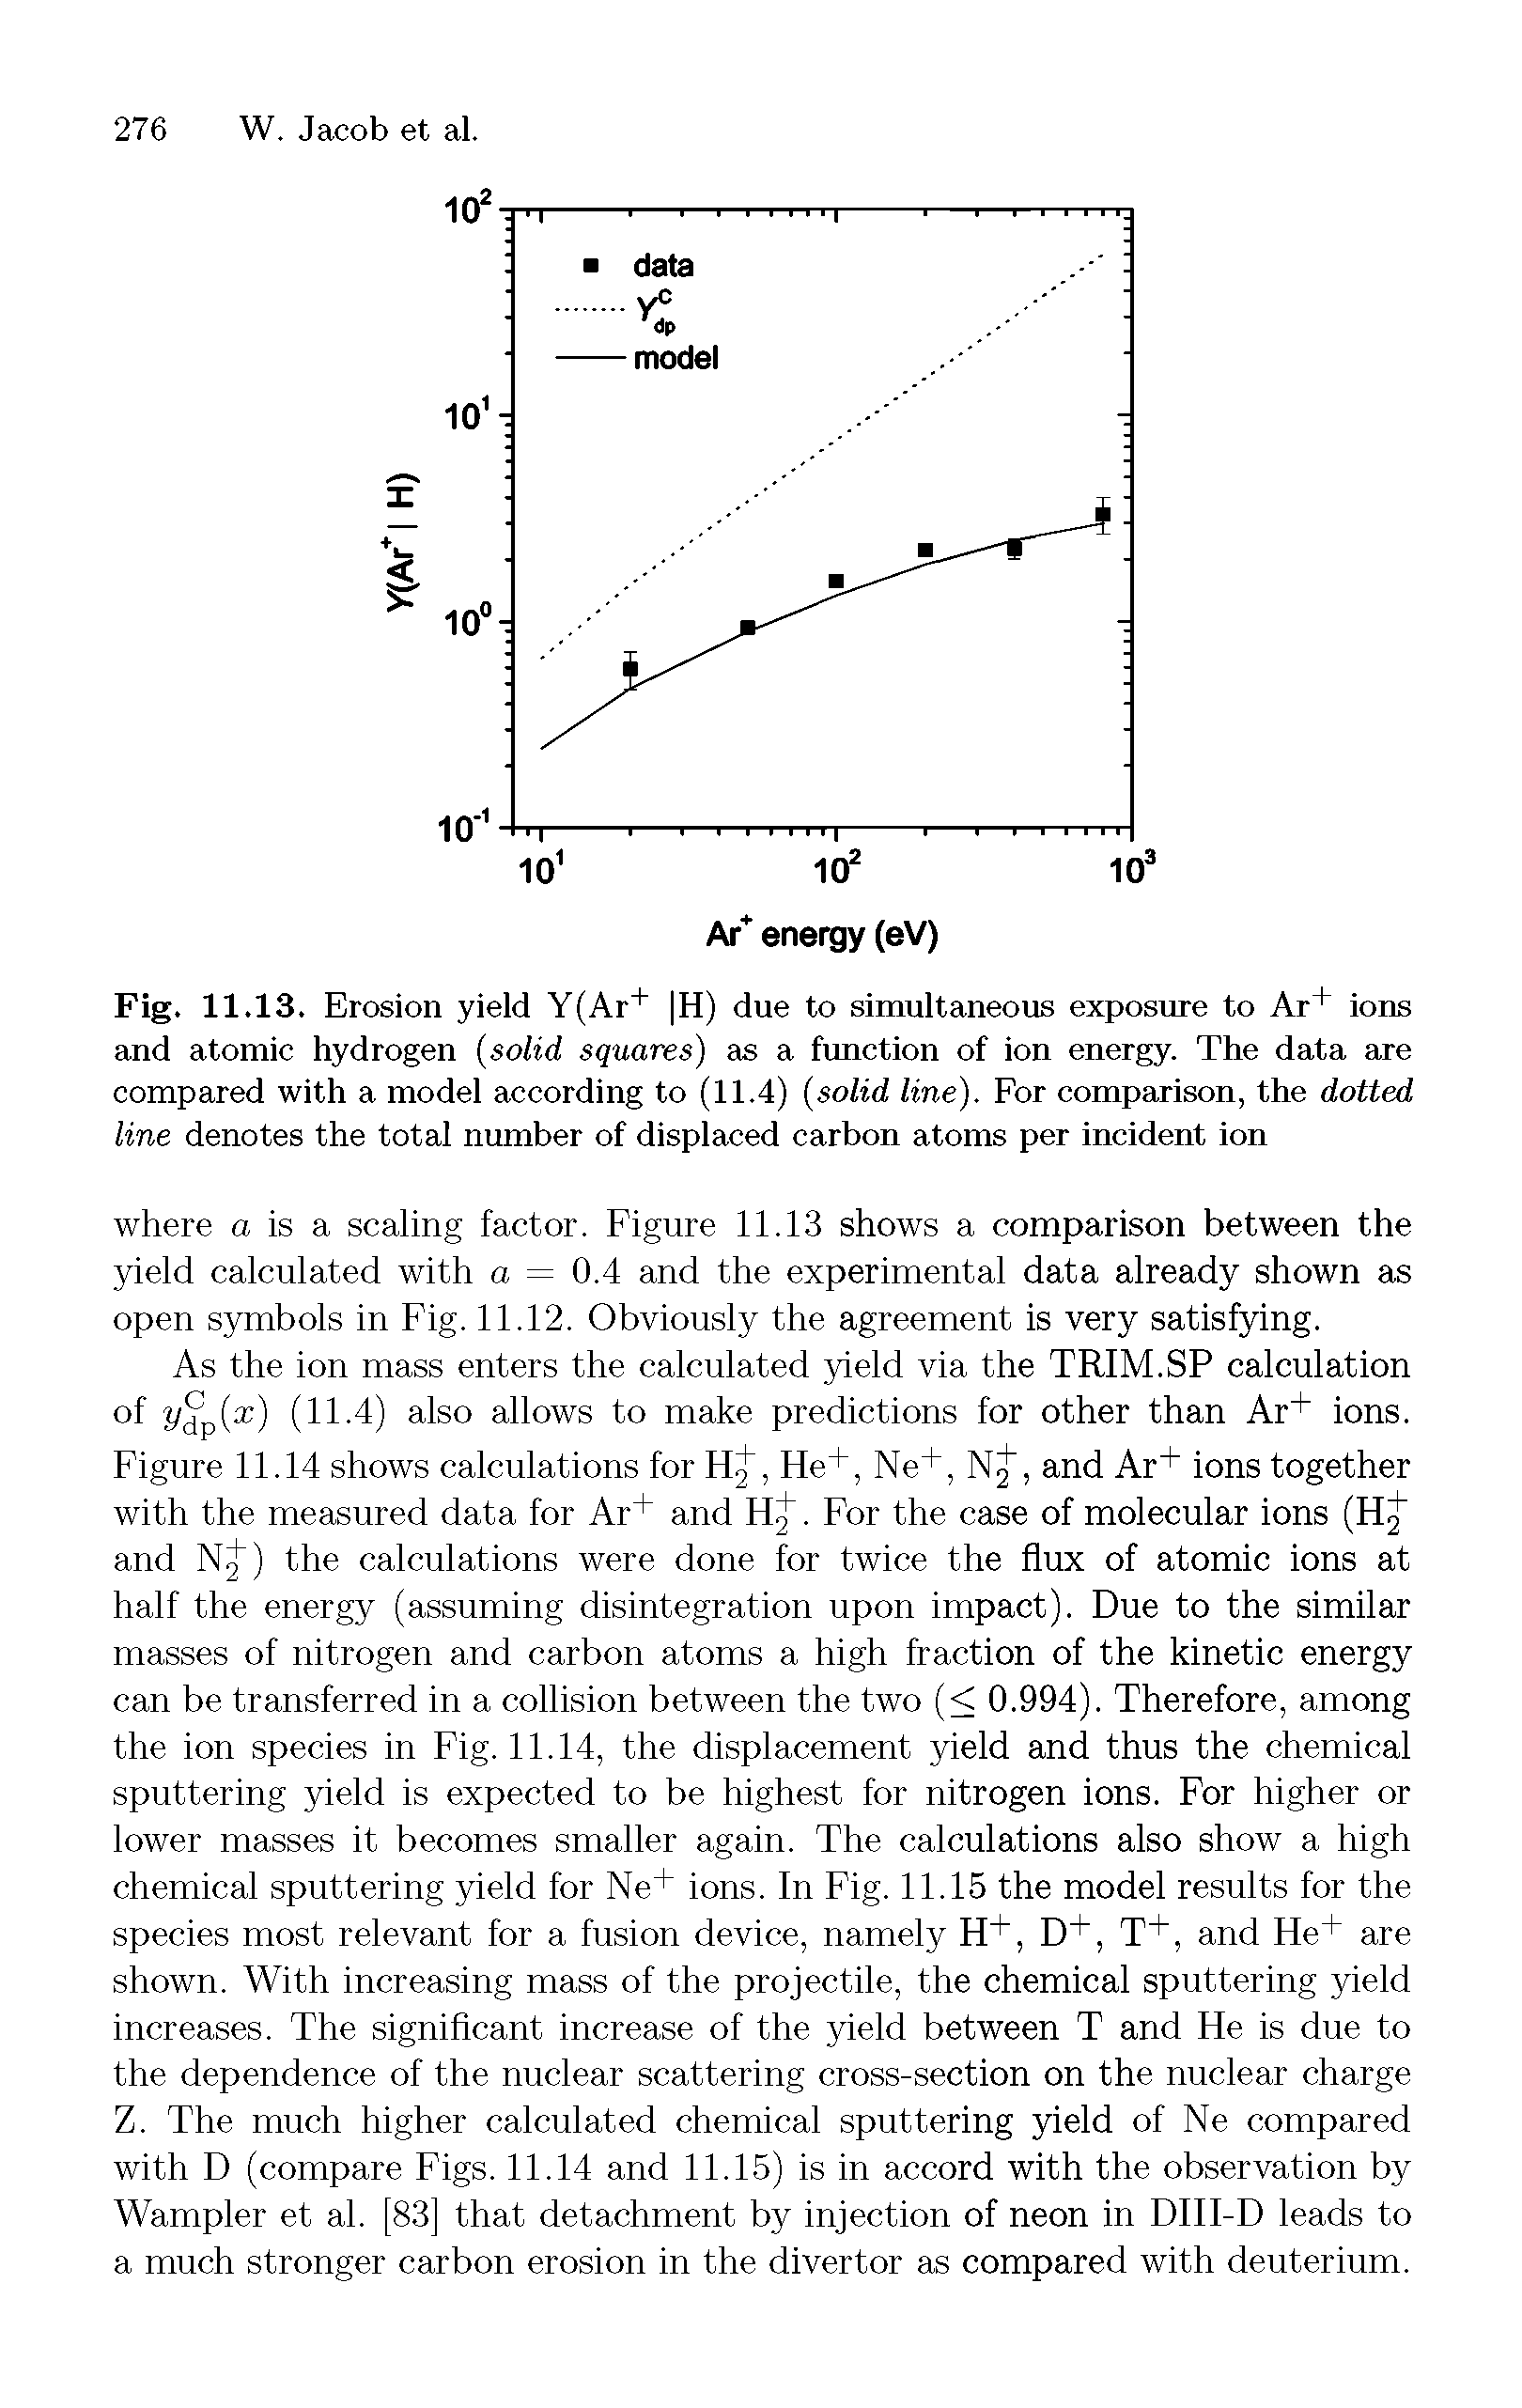 Fig. 11.13. Erosion yield Y(Ar+ H) due to simultaneous exposure to Ar+ ions and atomic hydrogen (solid squares) as a function of ion energy. The data are compared with a model according to (11.4) (solid line). For comparison, the dotted line denotes the total number of displaced carbon atoms per incident ion...